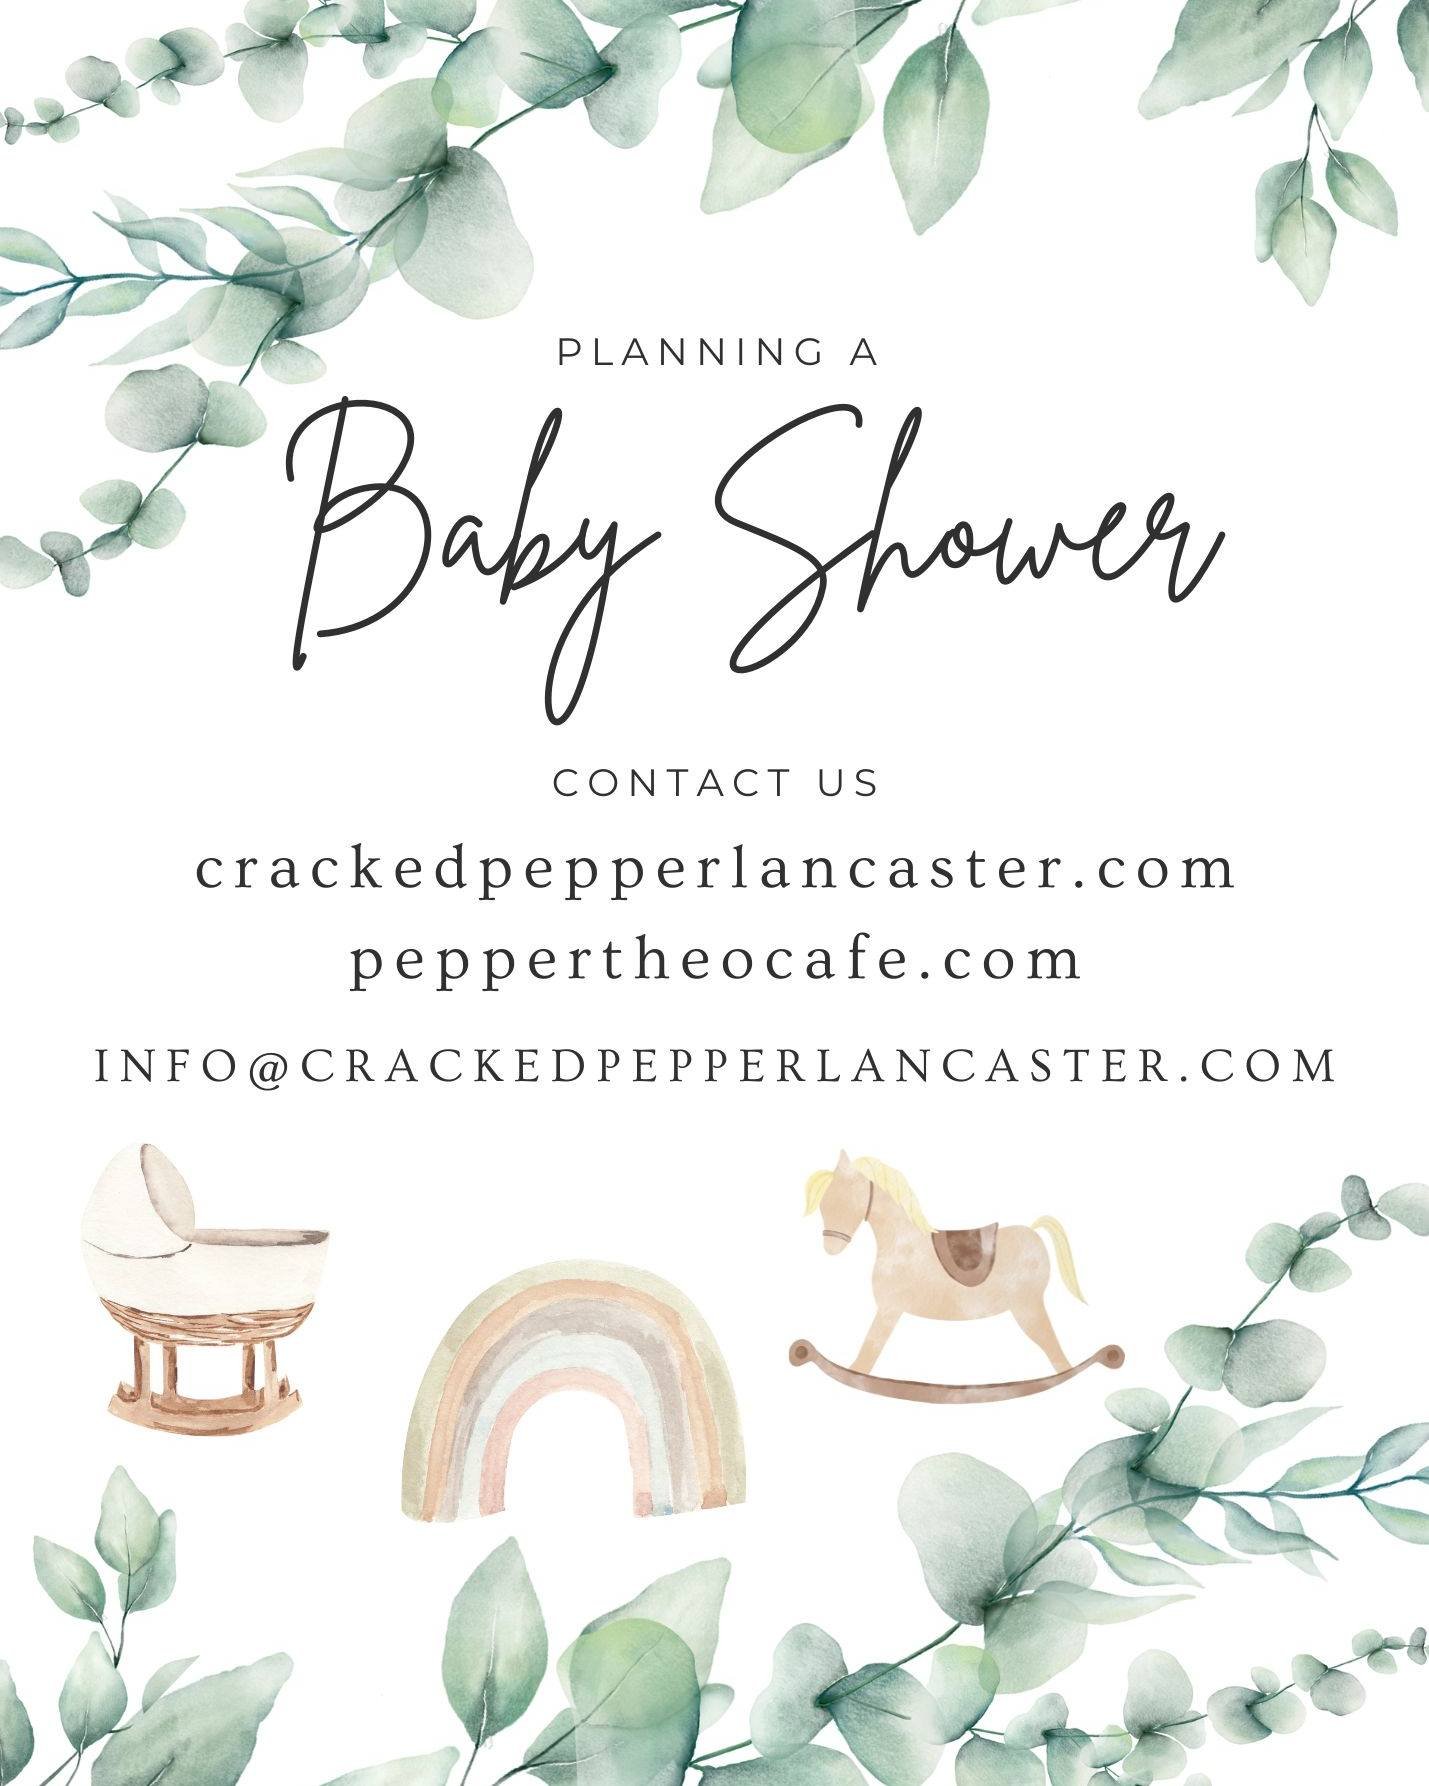 Planning a baby shower?  Throwing a gender reveal party?  Having a sip-and-see?  Let us help!  @crackedpepperlancaster and PepperTheo Cafe &amp; Events can take care of all of the details.  Start the conversation with us at info@crackedpepperlancaste